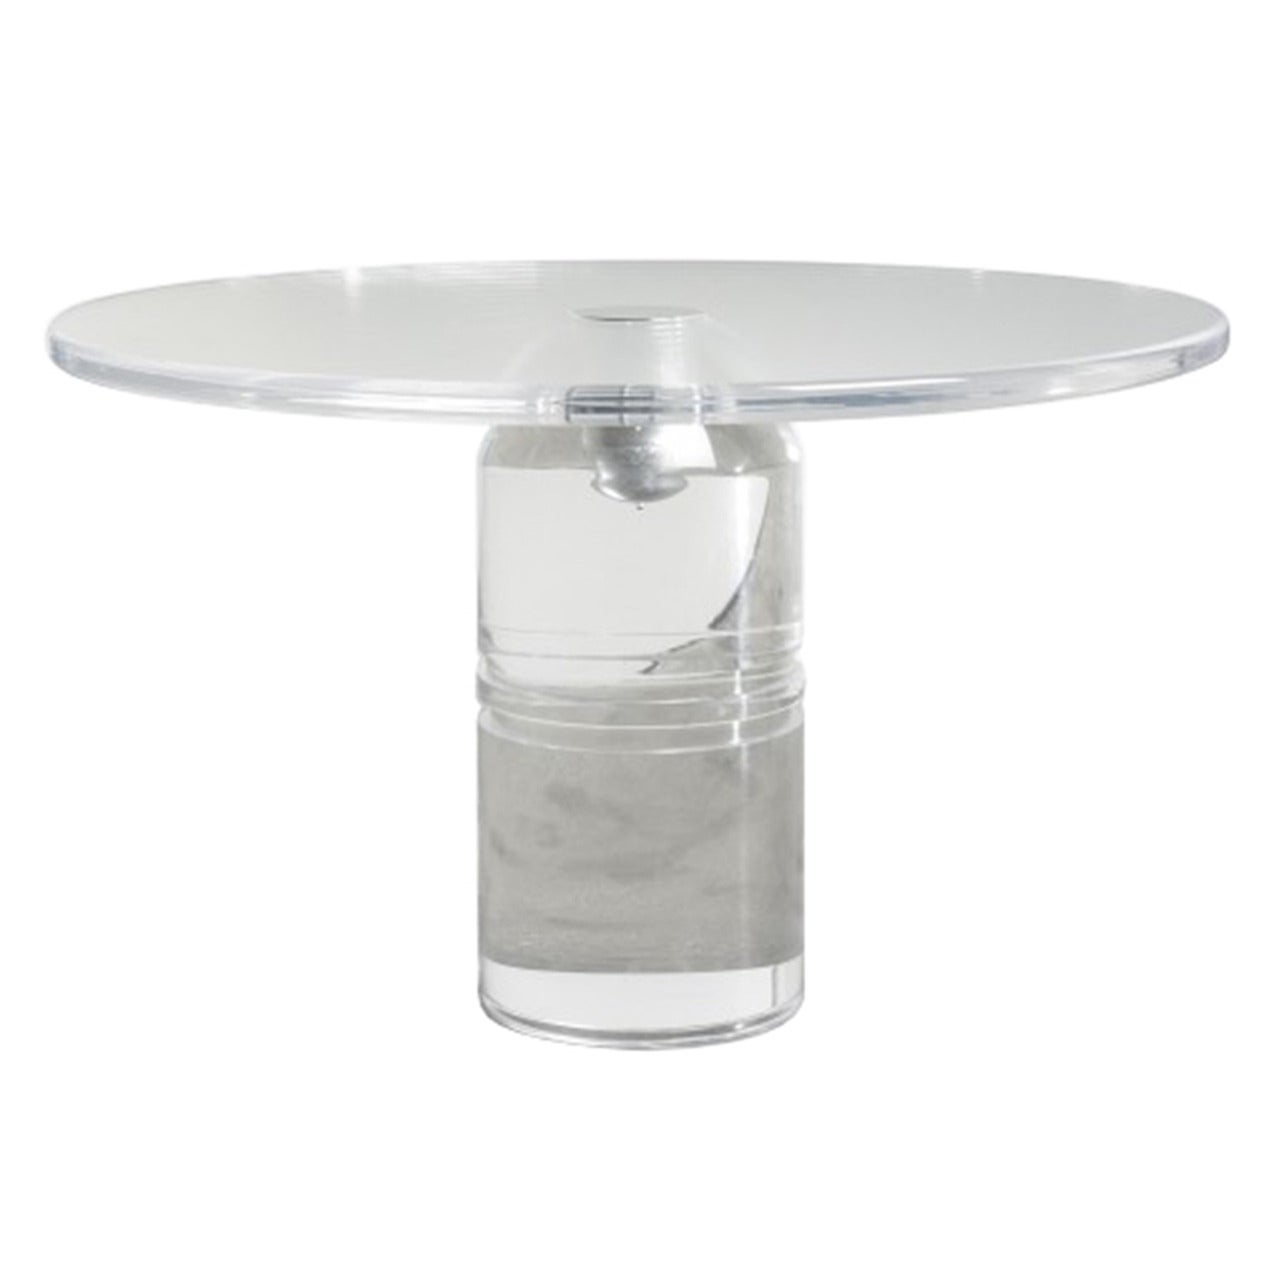 Charles Hollis Jones Le Dome Dining Table